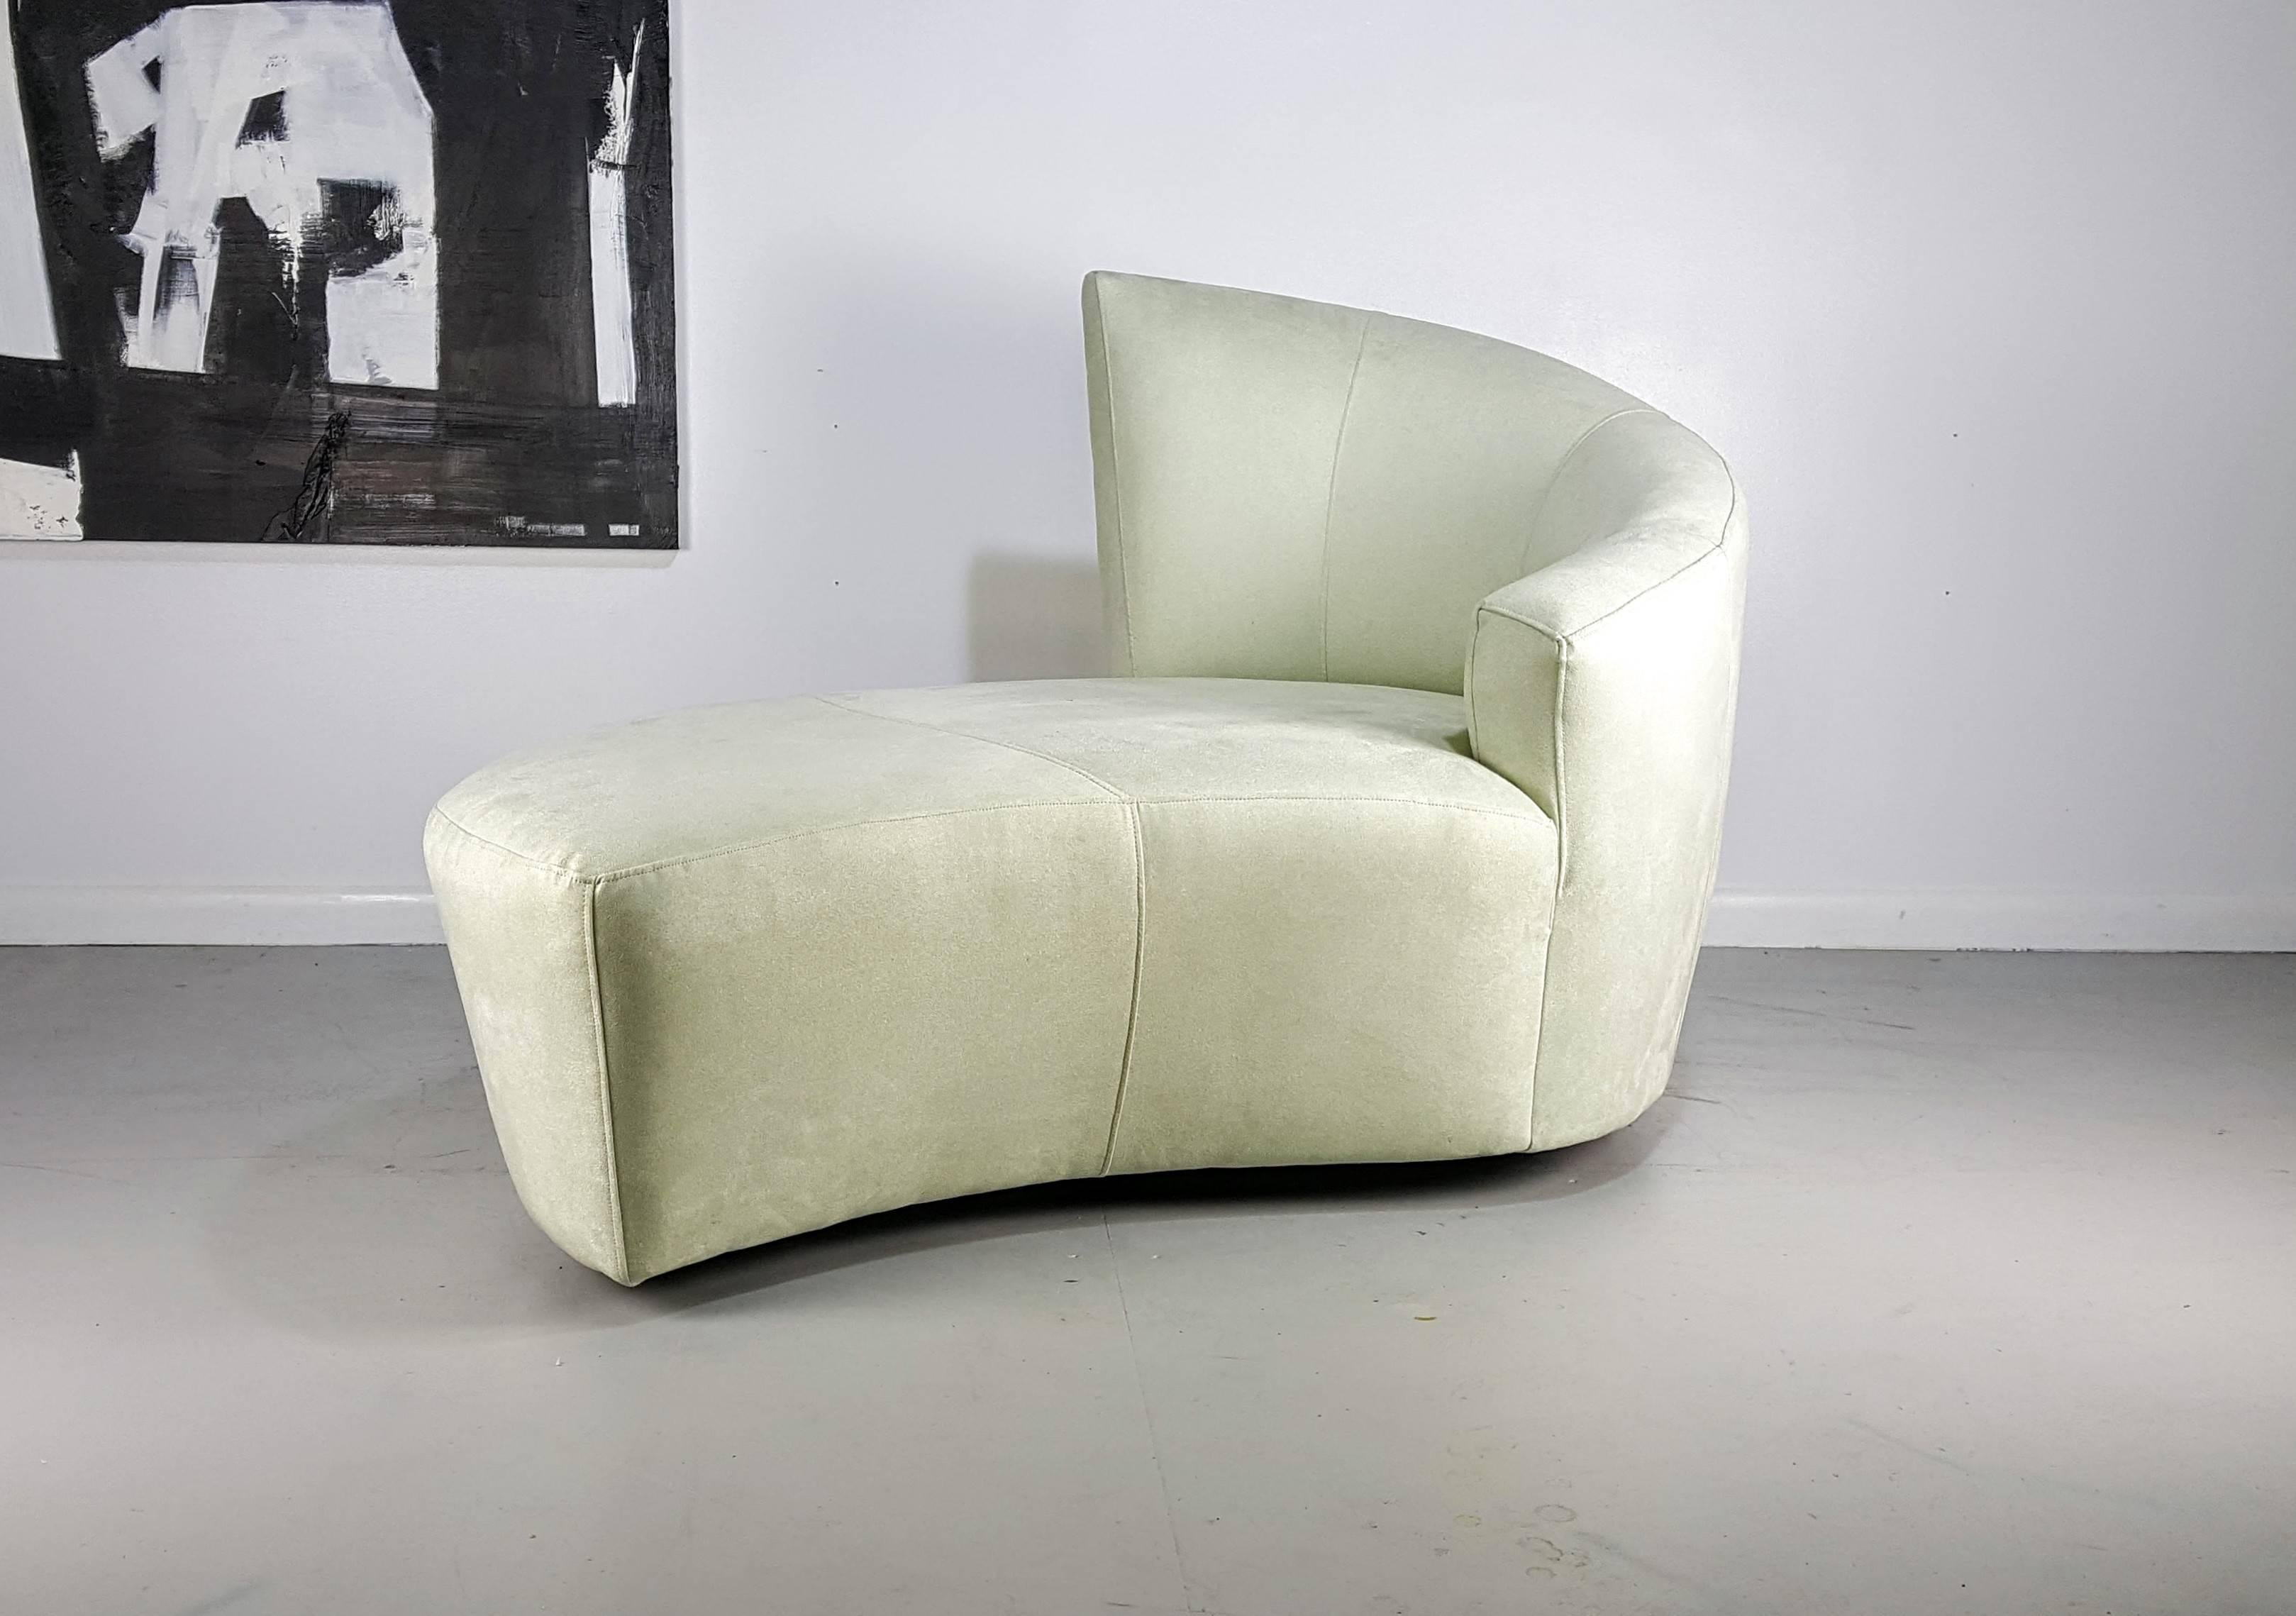 Sculptural Bilbao chaise longues by Vladimir Kagan in ultrasuede, 1970s. Newly reupholstered. Color reads as a neutral cream with a pale green cast. 

See this item in our private NYC showroom! Refine Limited is located in the heart of Chelsea at